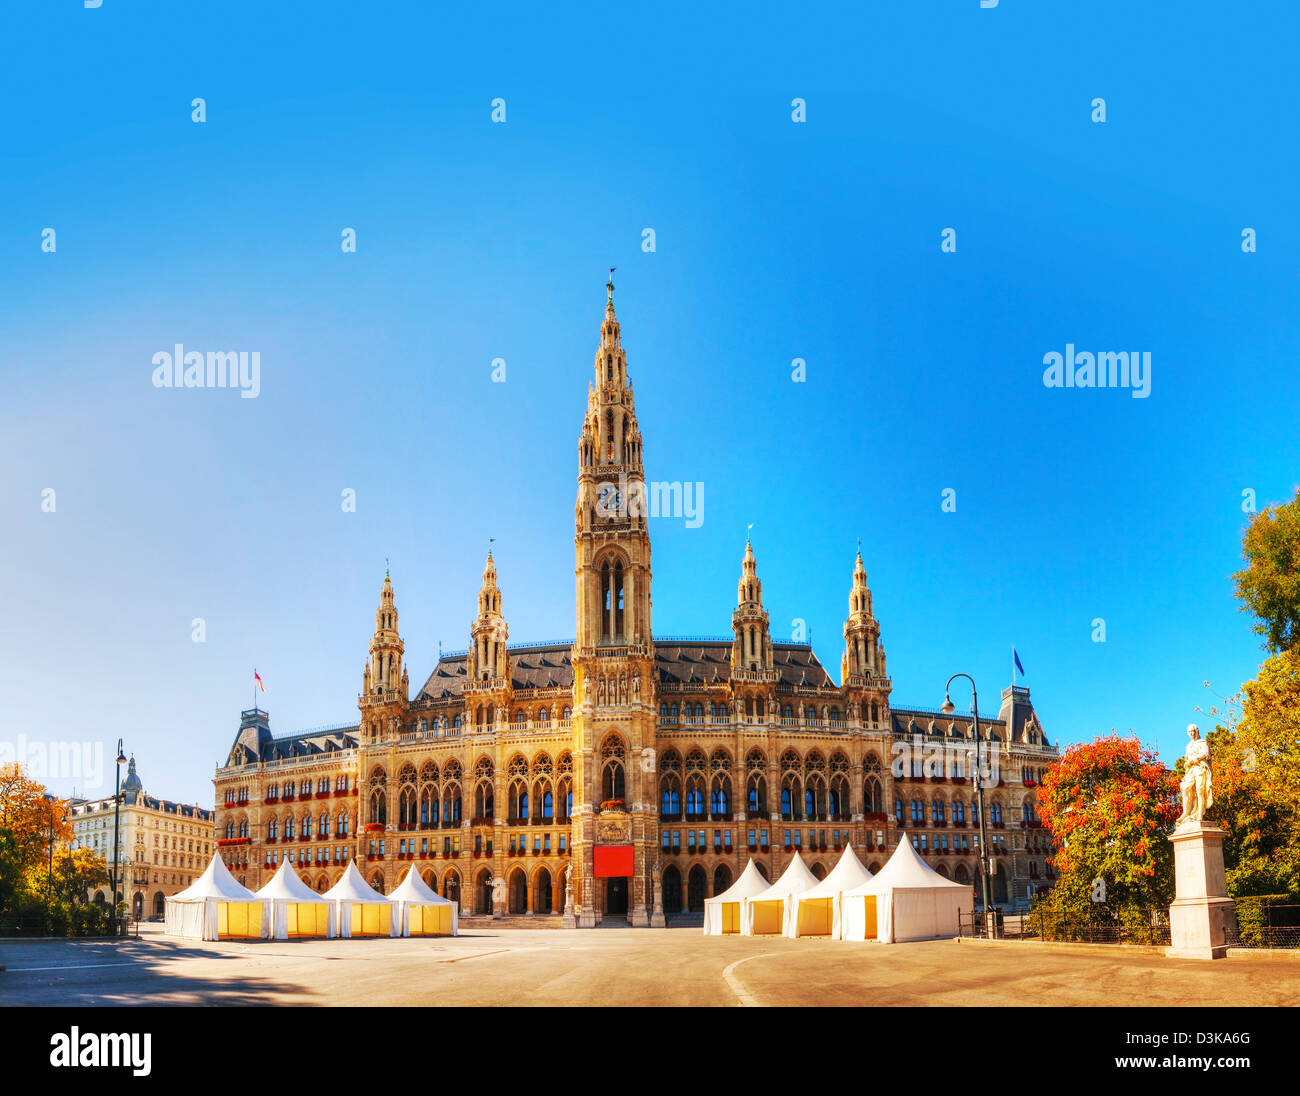 Rathaus (Cityhall) in Vienna, Austria on a sunny day. The Rathaus serves as the seat both of the mayor and city council. Stock Photo